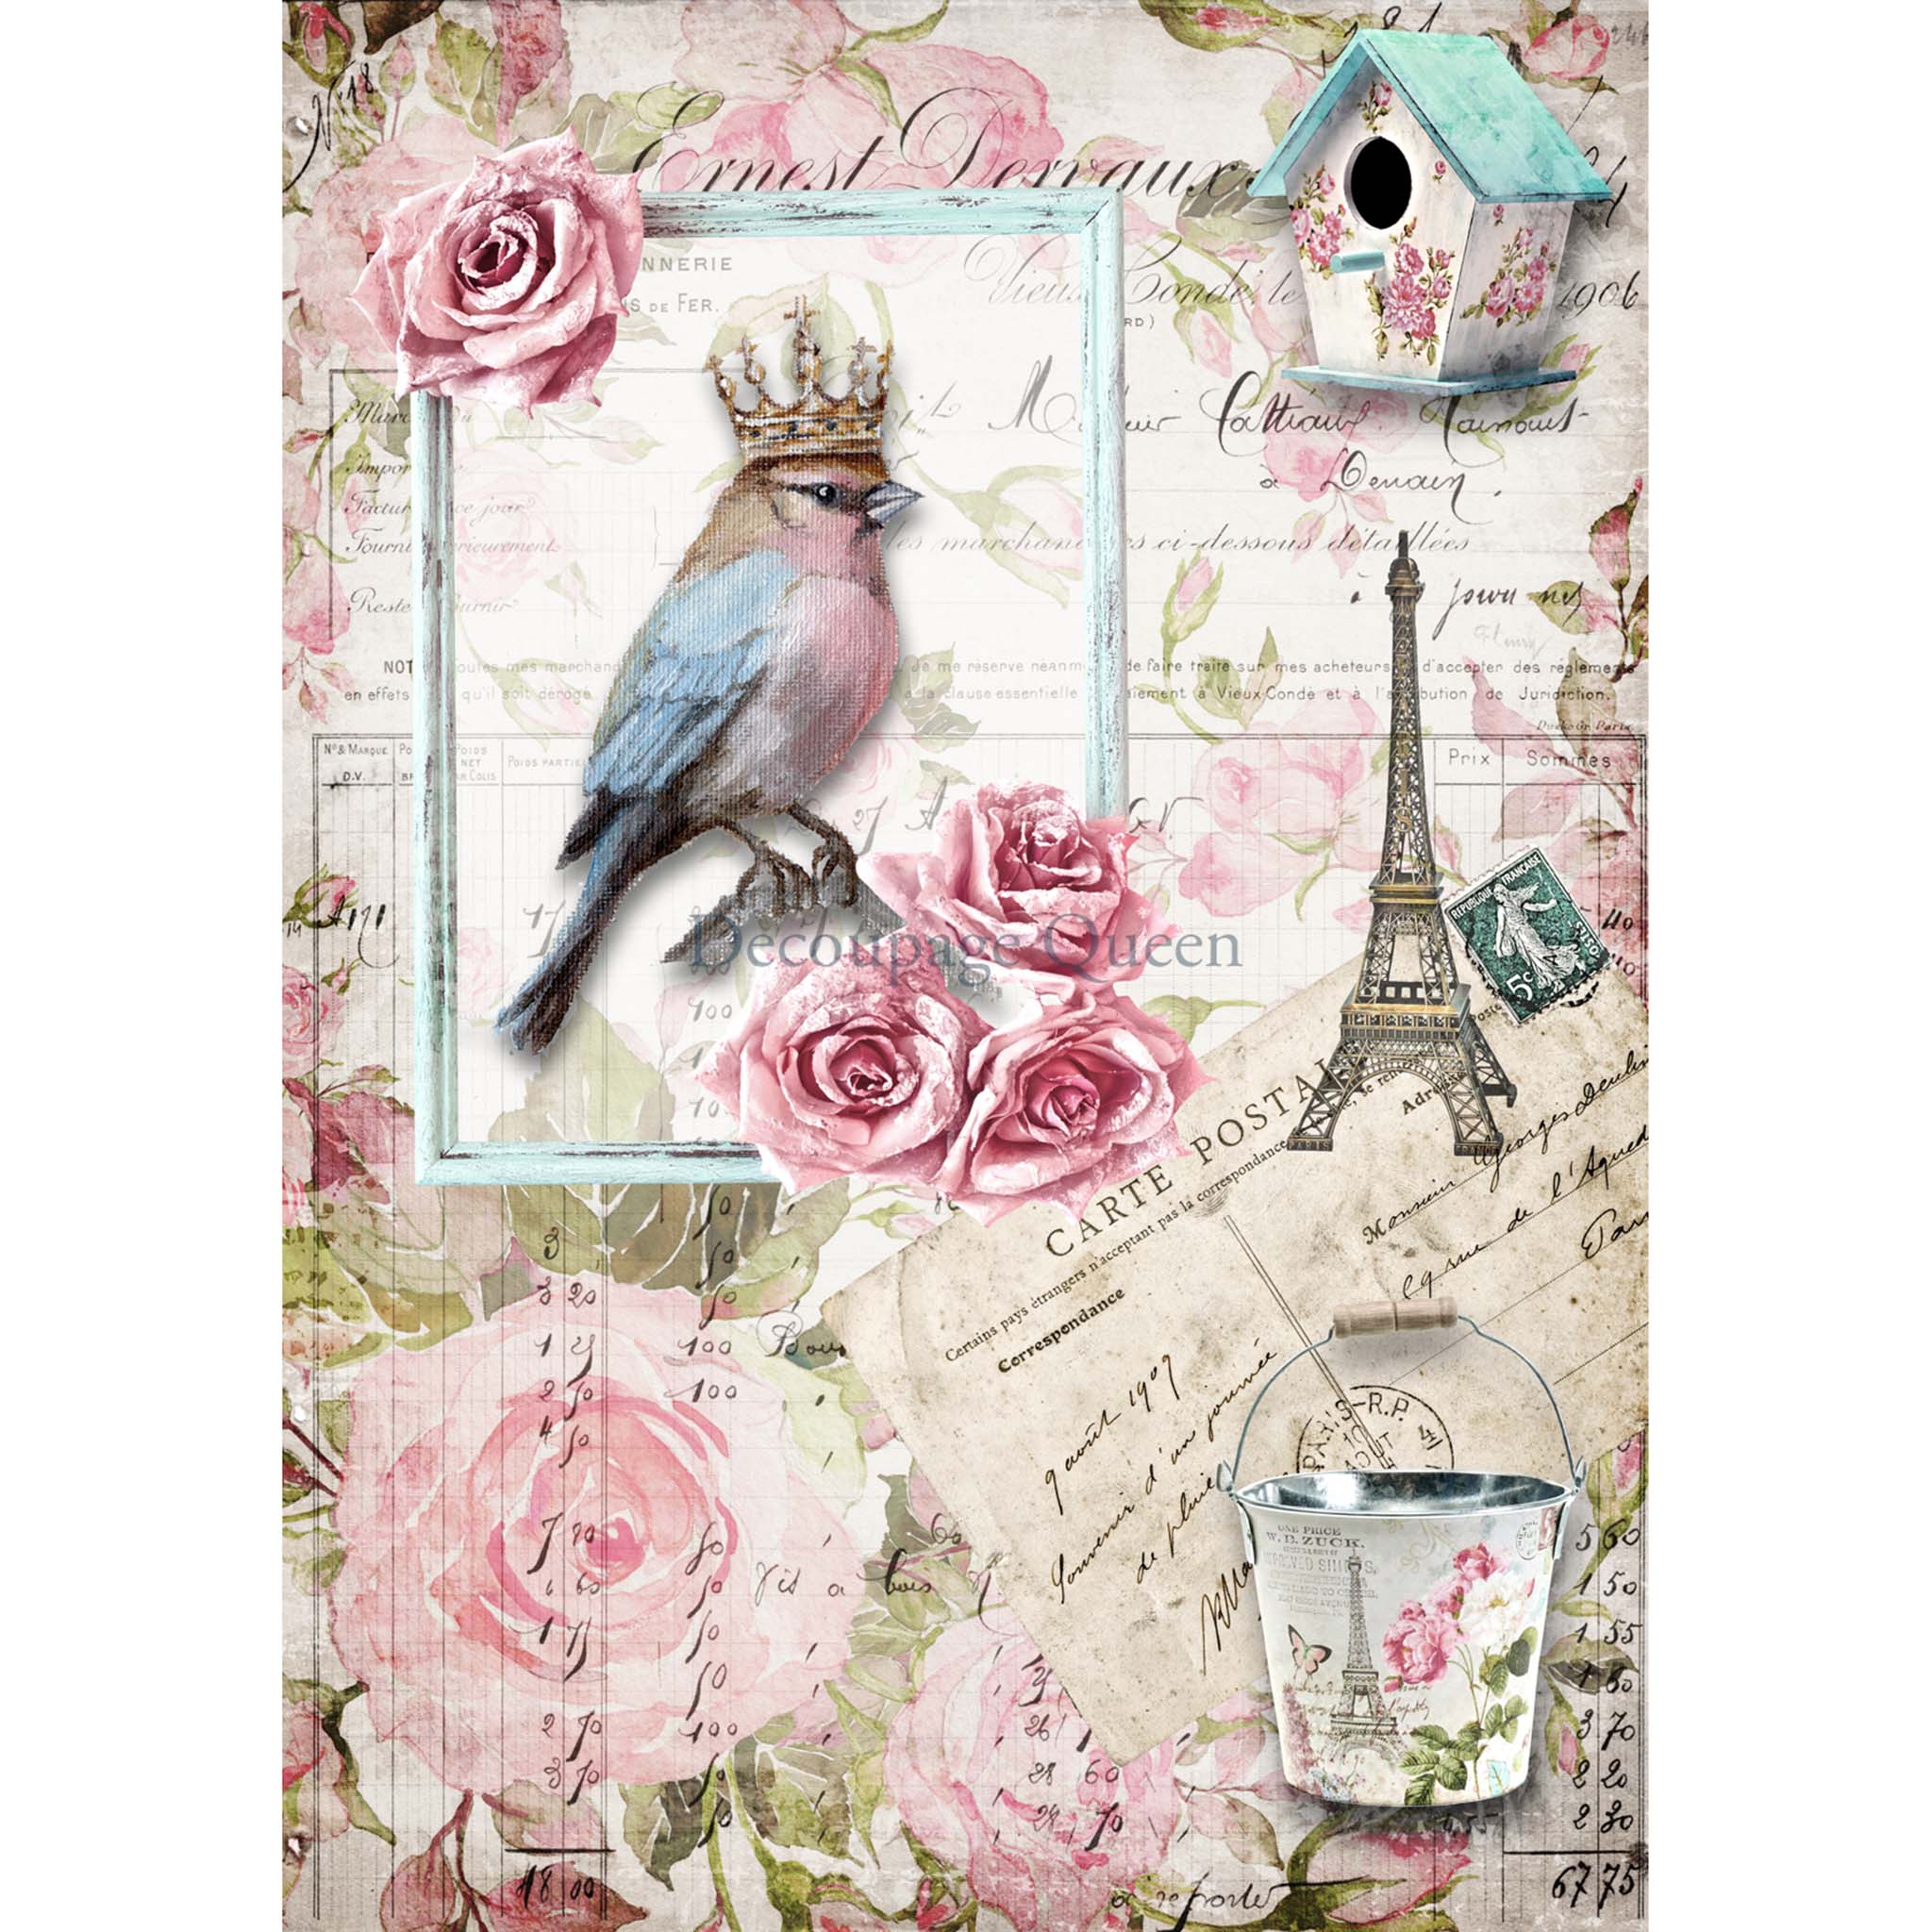 A1 rice paper design that features a small bird wearing a crown perched in a picture frame, surrounded by iconic Parisian elements like the Eiffel Tower, a birdhouse, and a French postcard against a floral background. White borders are on the sides.